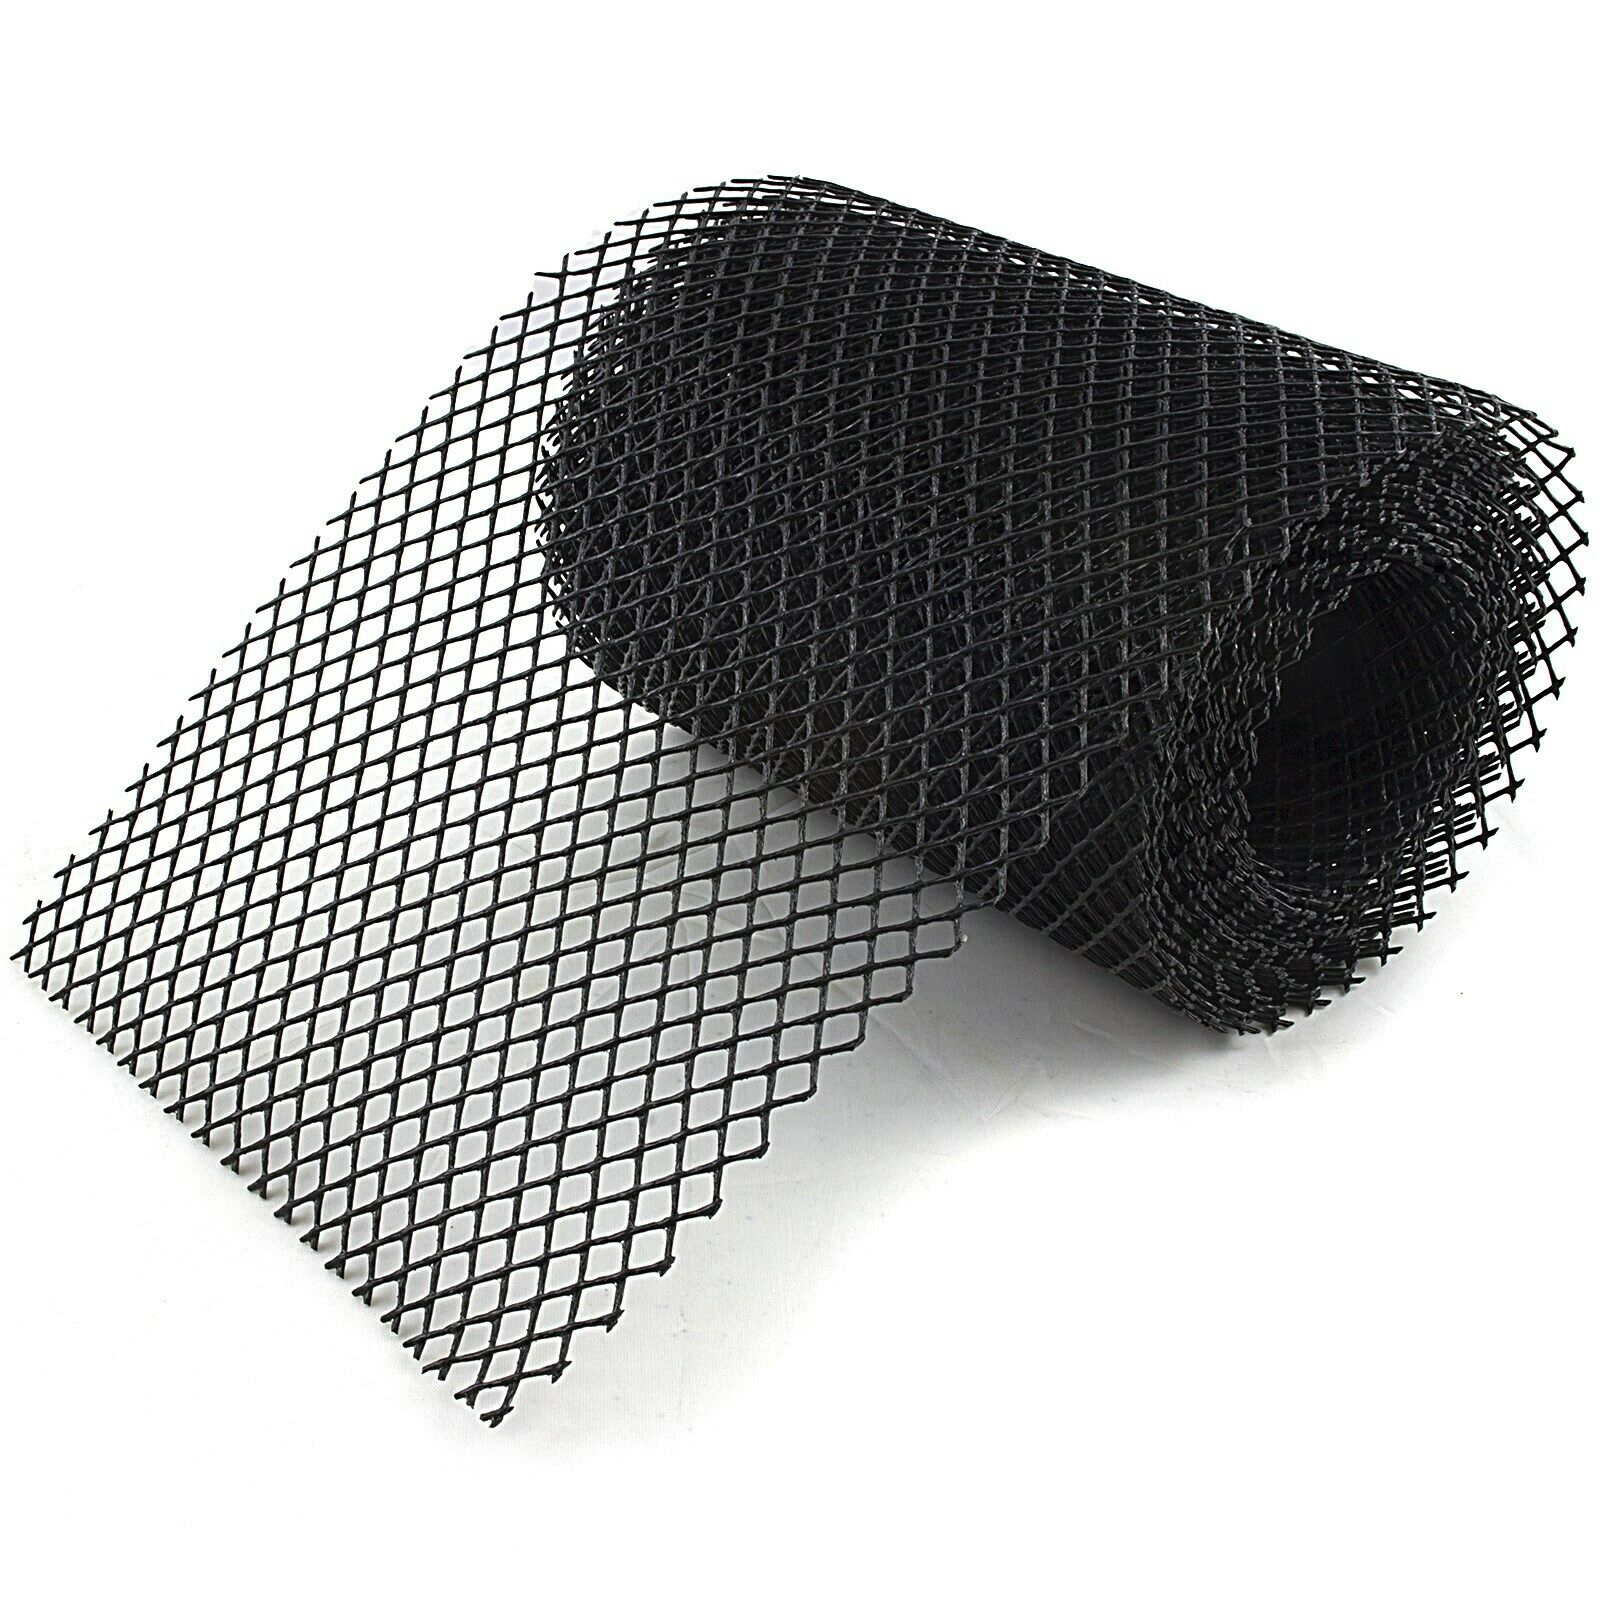 16 Ft X 6 In Gutter Guard Plastic Anti-clog Mesh Rain Protection Cover Filter